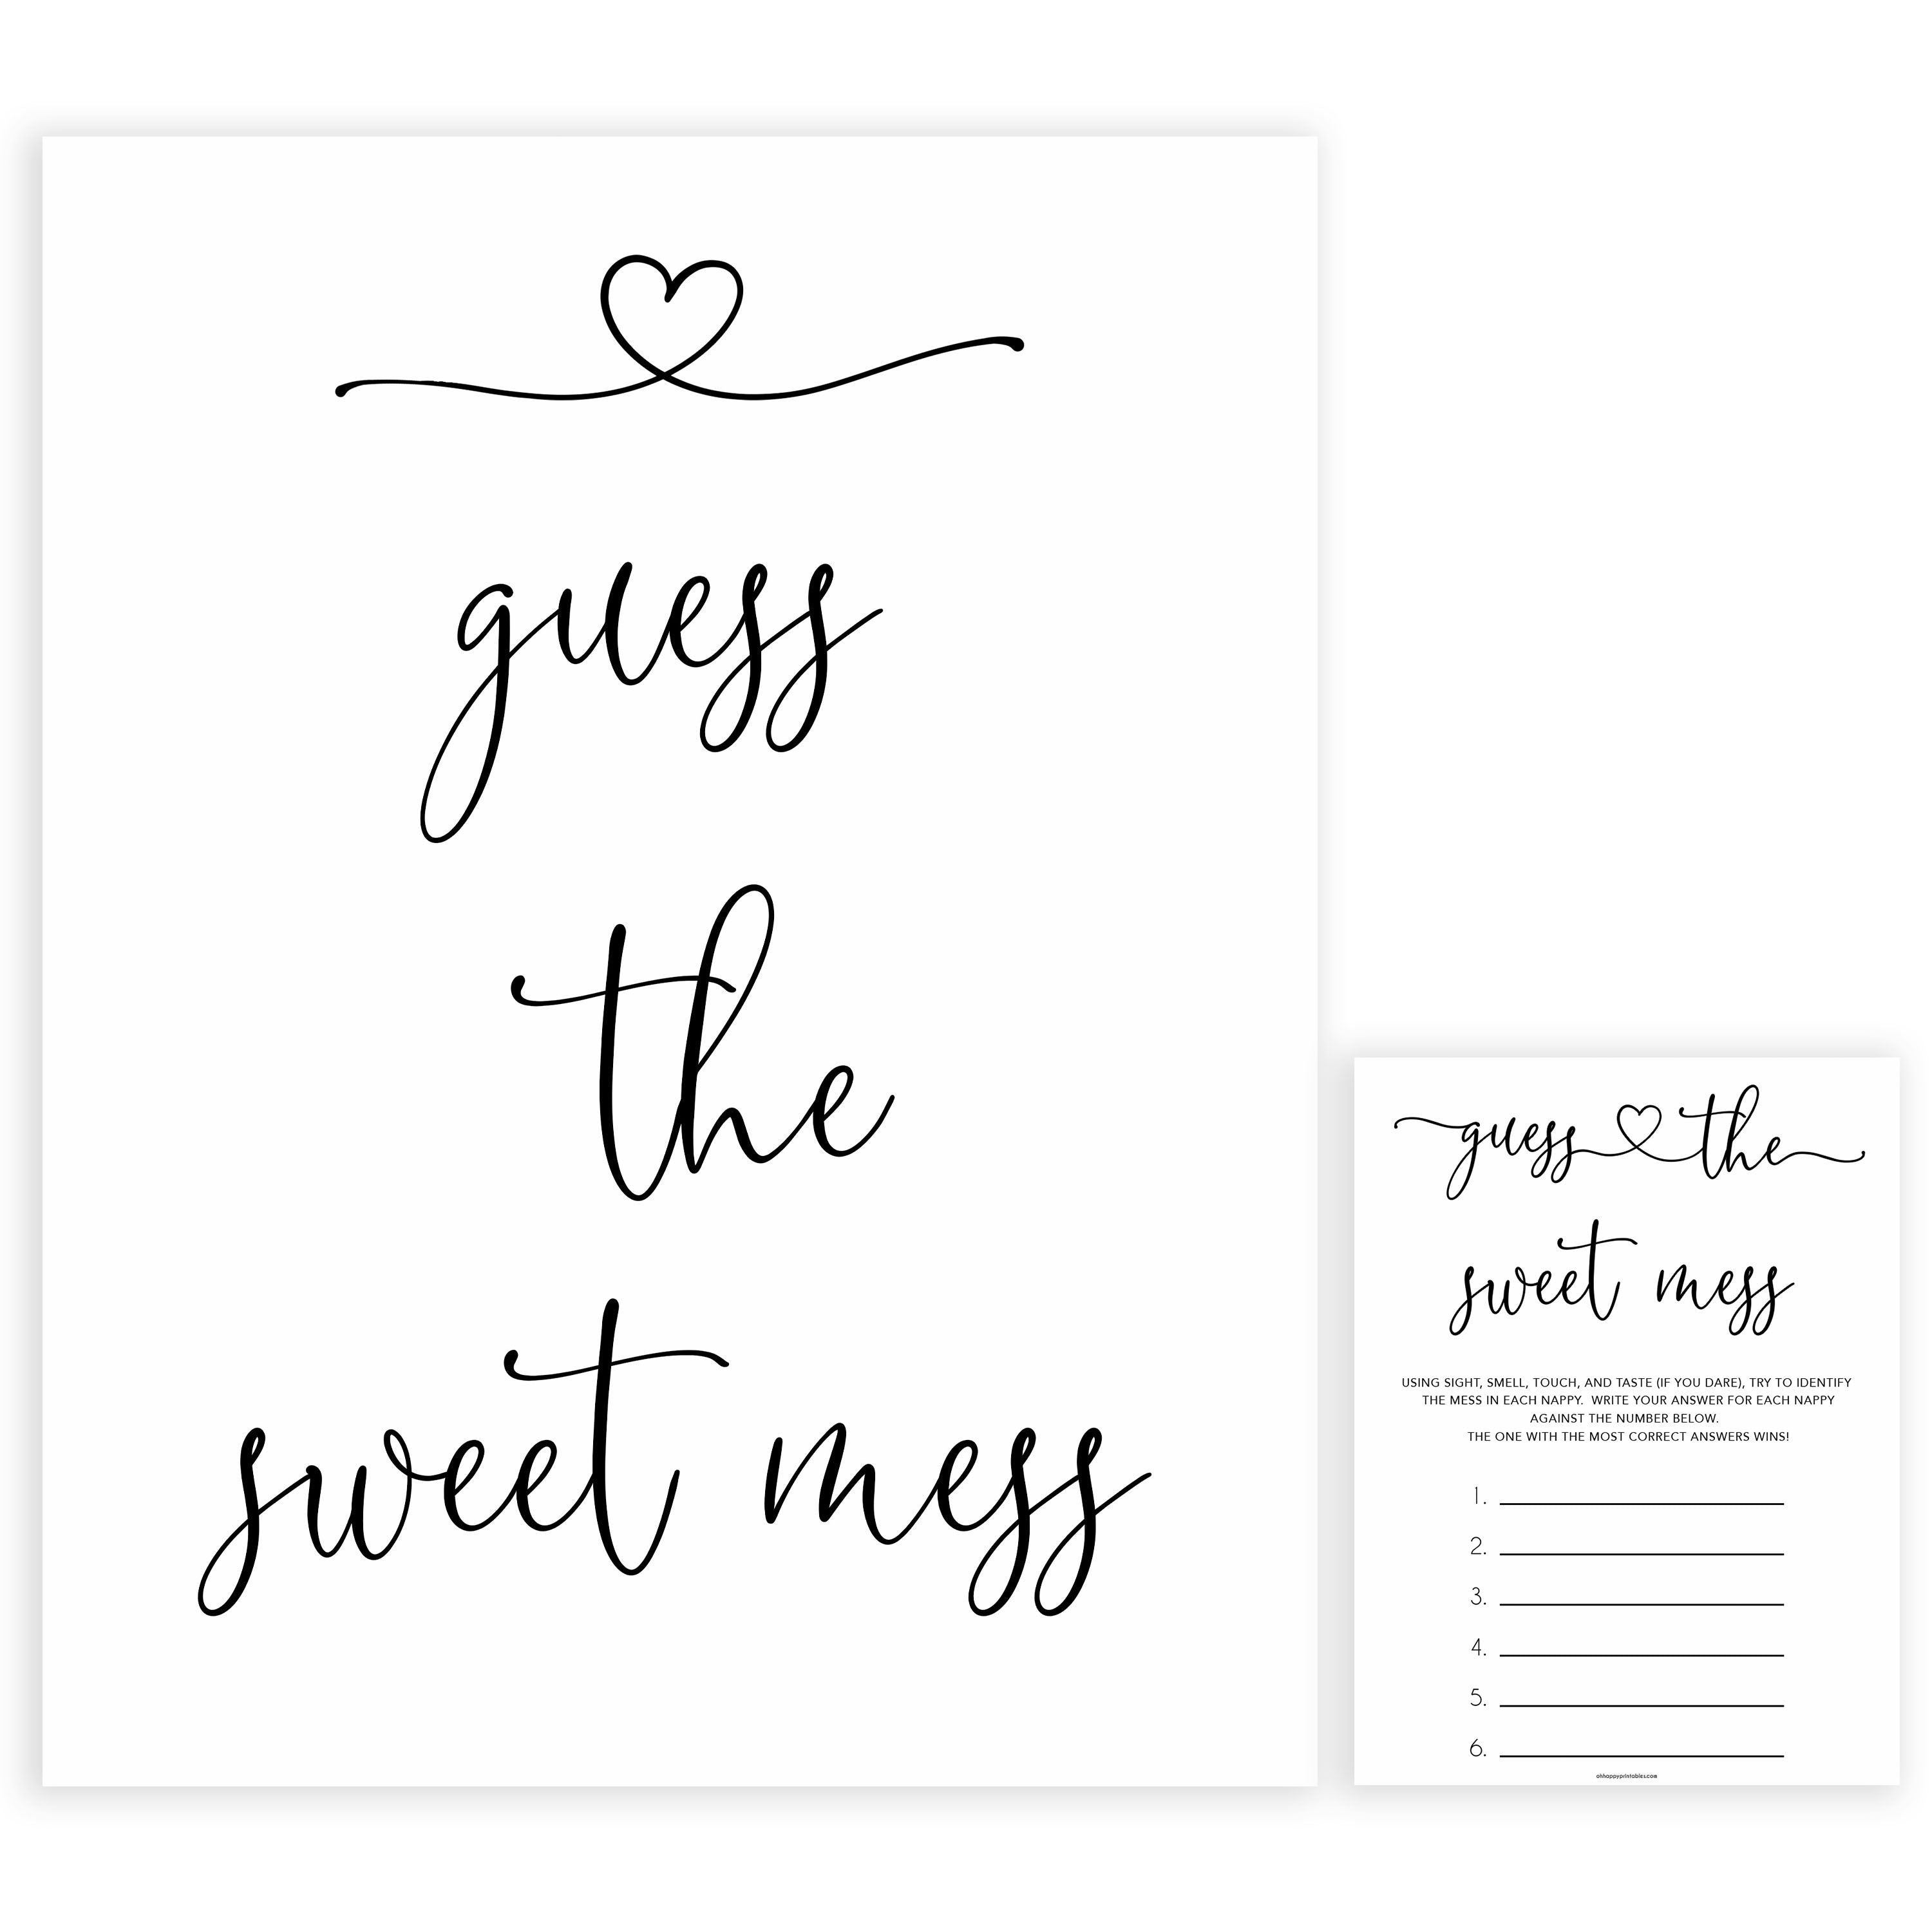 Minimalist baby shower games, guess the sweet mess baby games, 10 baby game bundles, fun baby games, printable baby games, top baby games, popular baby games, labor or porn games, neutral baby games, gender reveal games